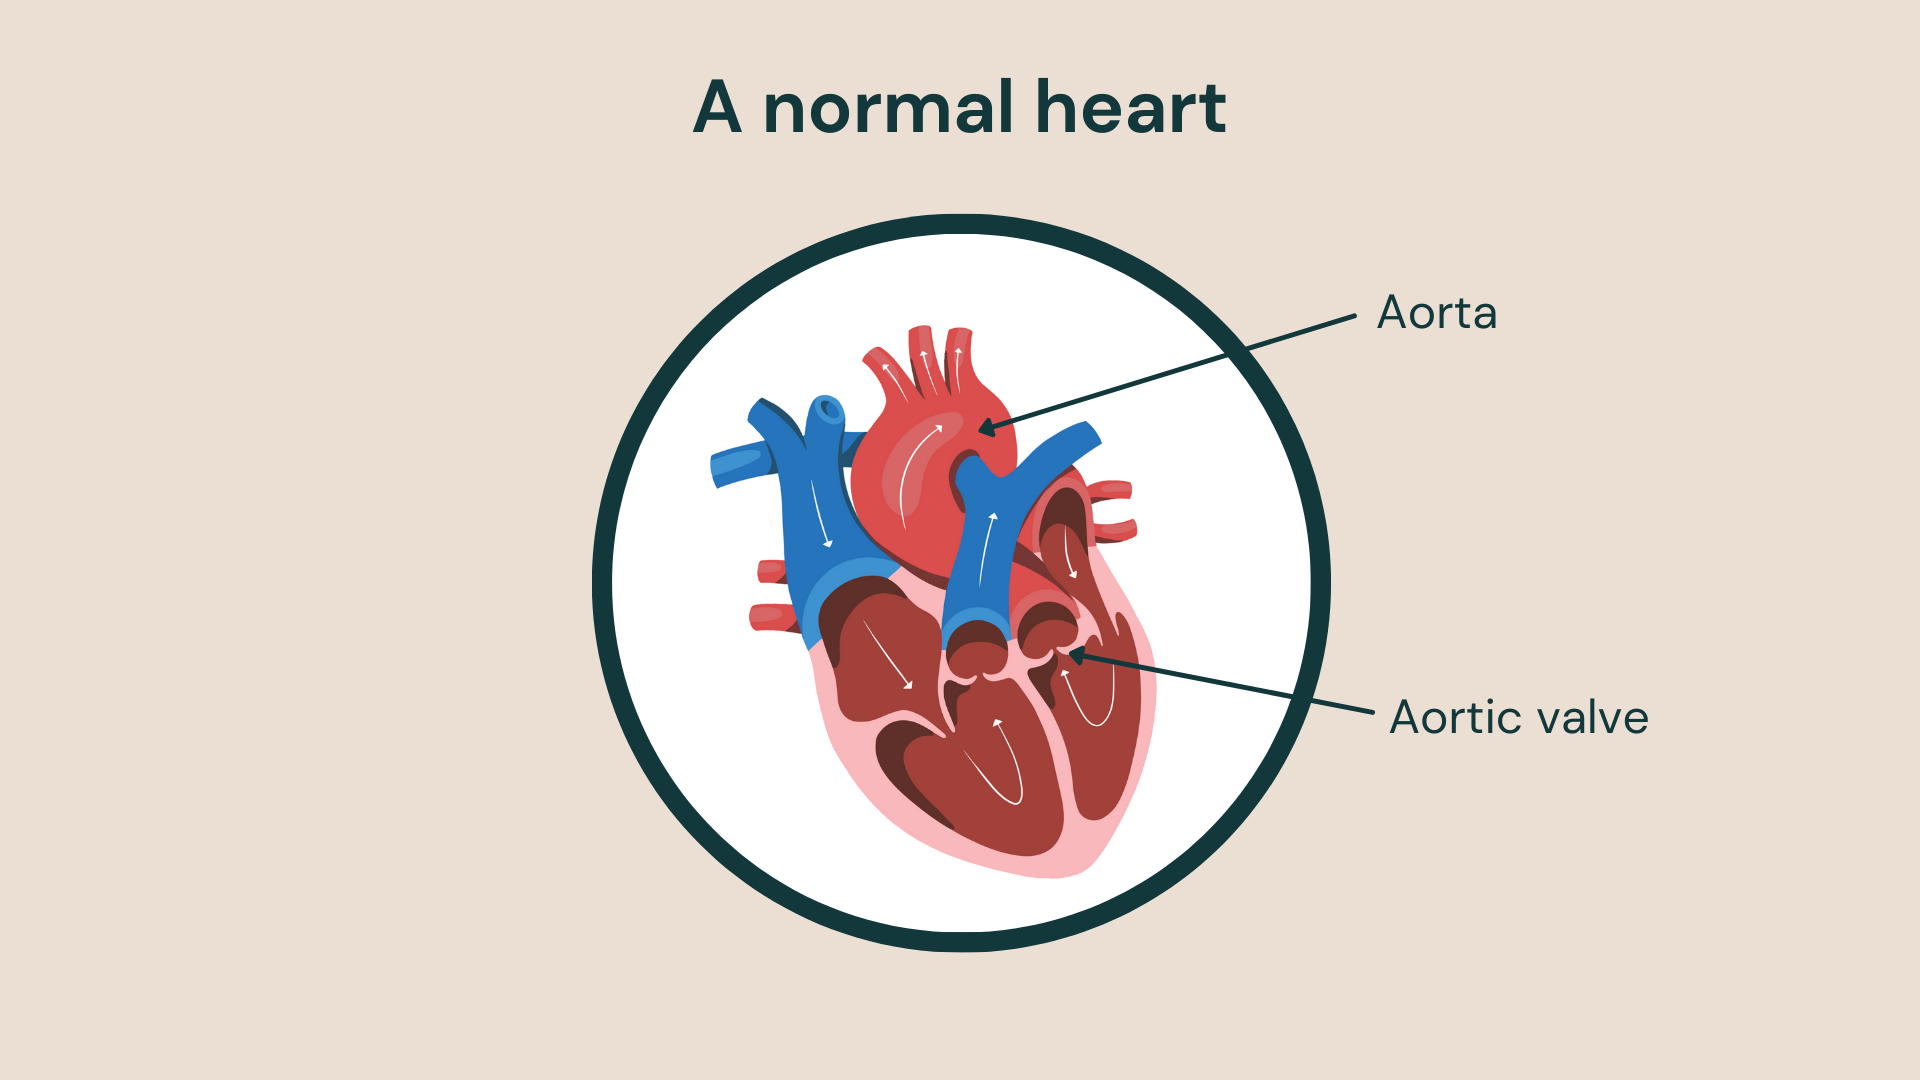 A normal heart, labelled